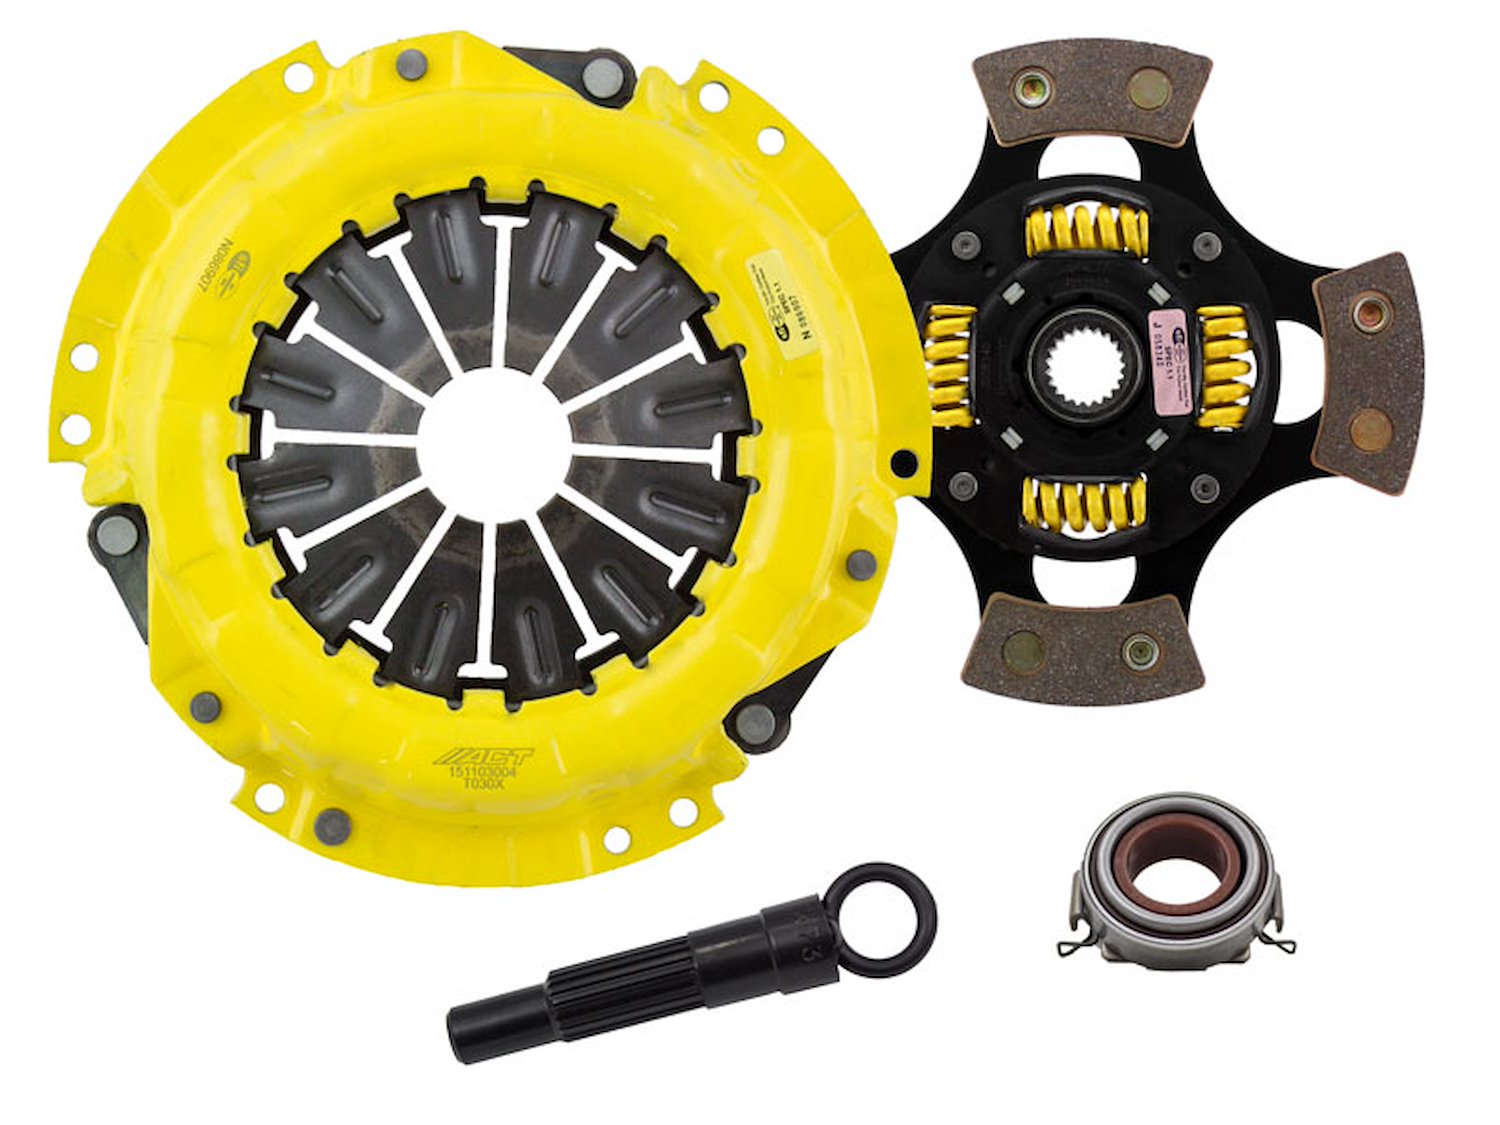 XT/Race Sprung 4-Pad Transmission Clutch Kit Fits Select Multiple Makes/Models